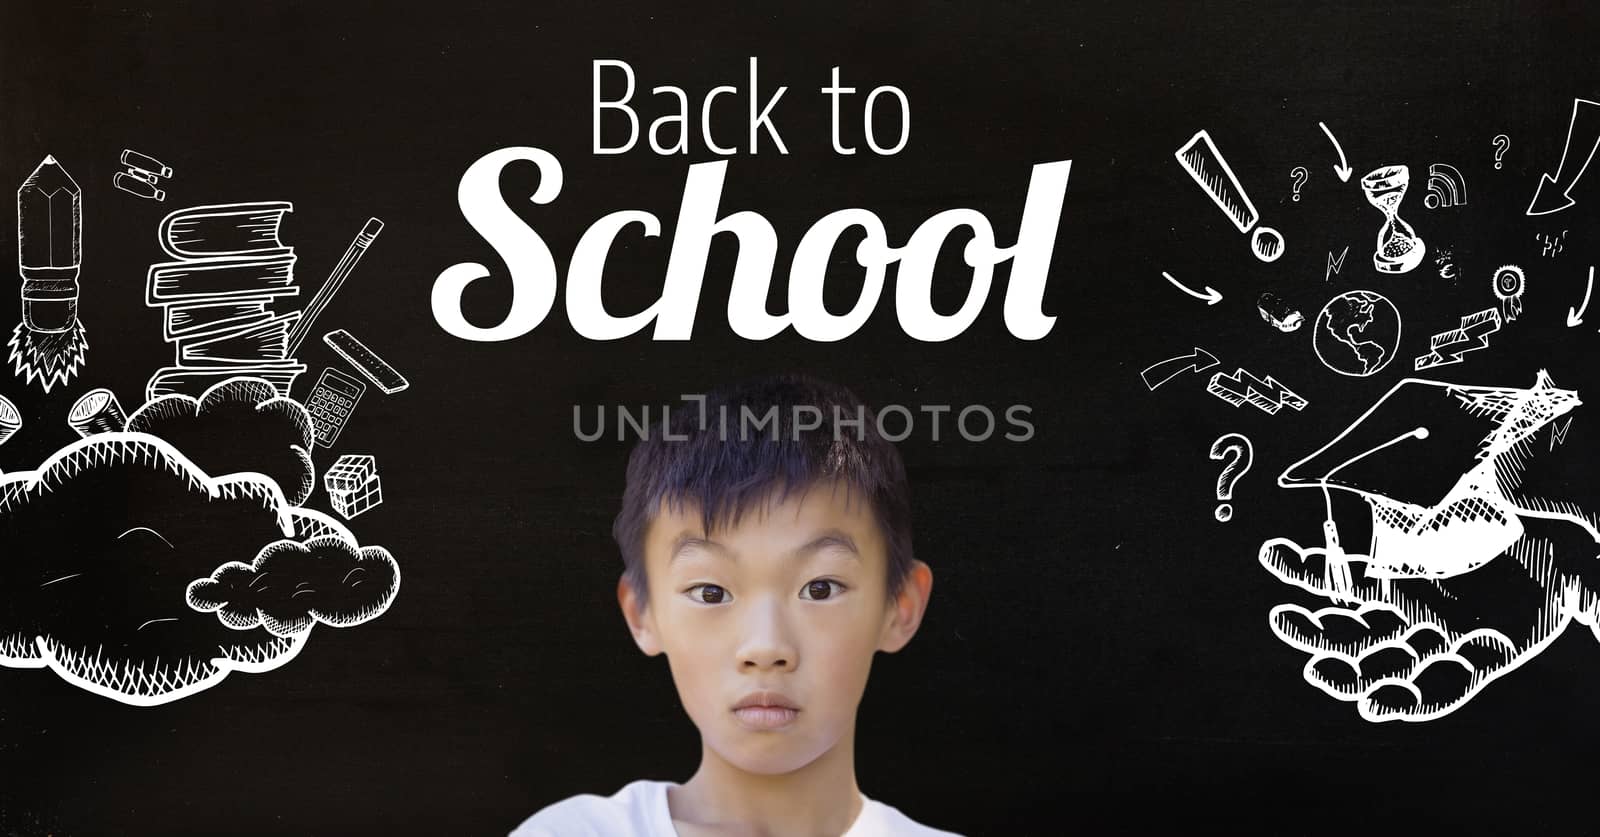 Boy and Back to school text with education graphics on blackboard by Wavebreakmedia